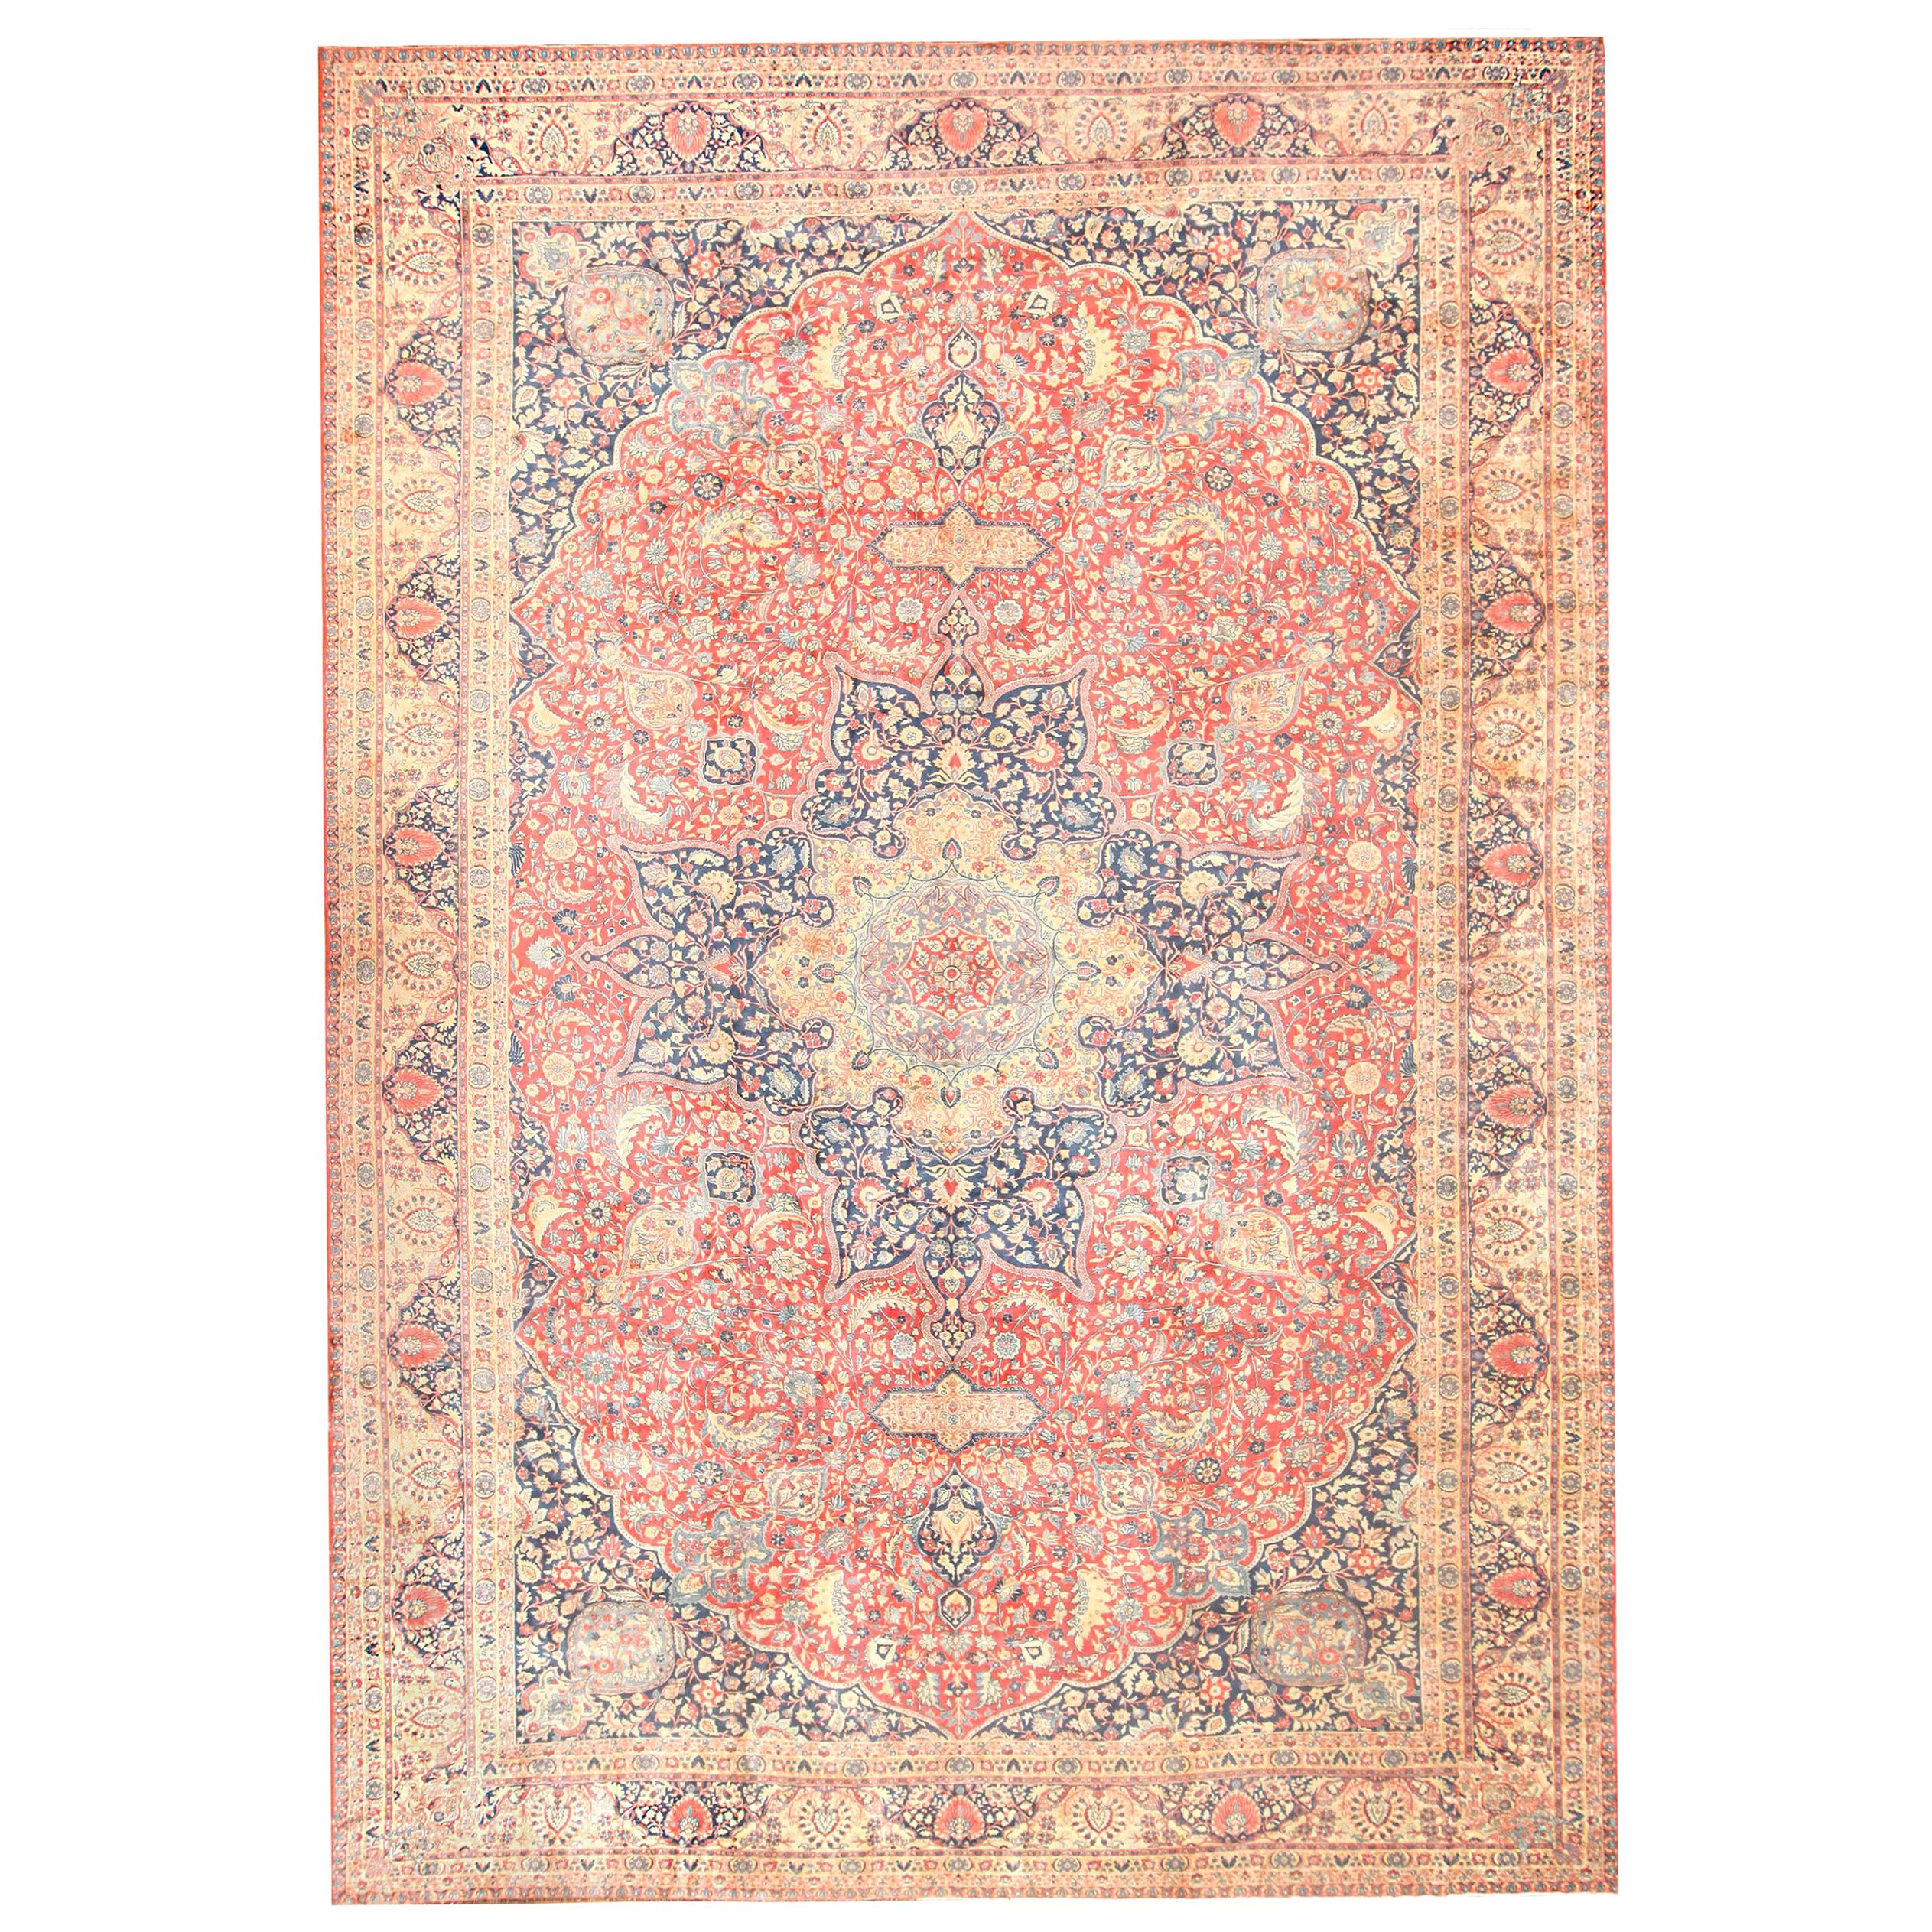 Antique Persian Tabriz Carpet. Size: 14 ft 10 in x 21 ft 5 in (4.52 m x 6.53 m)